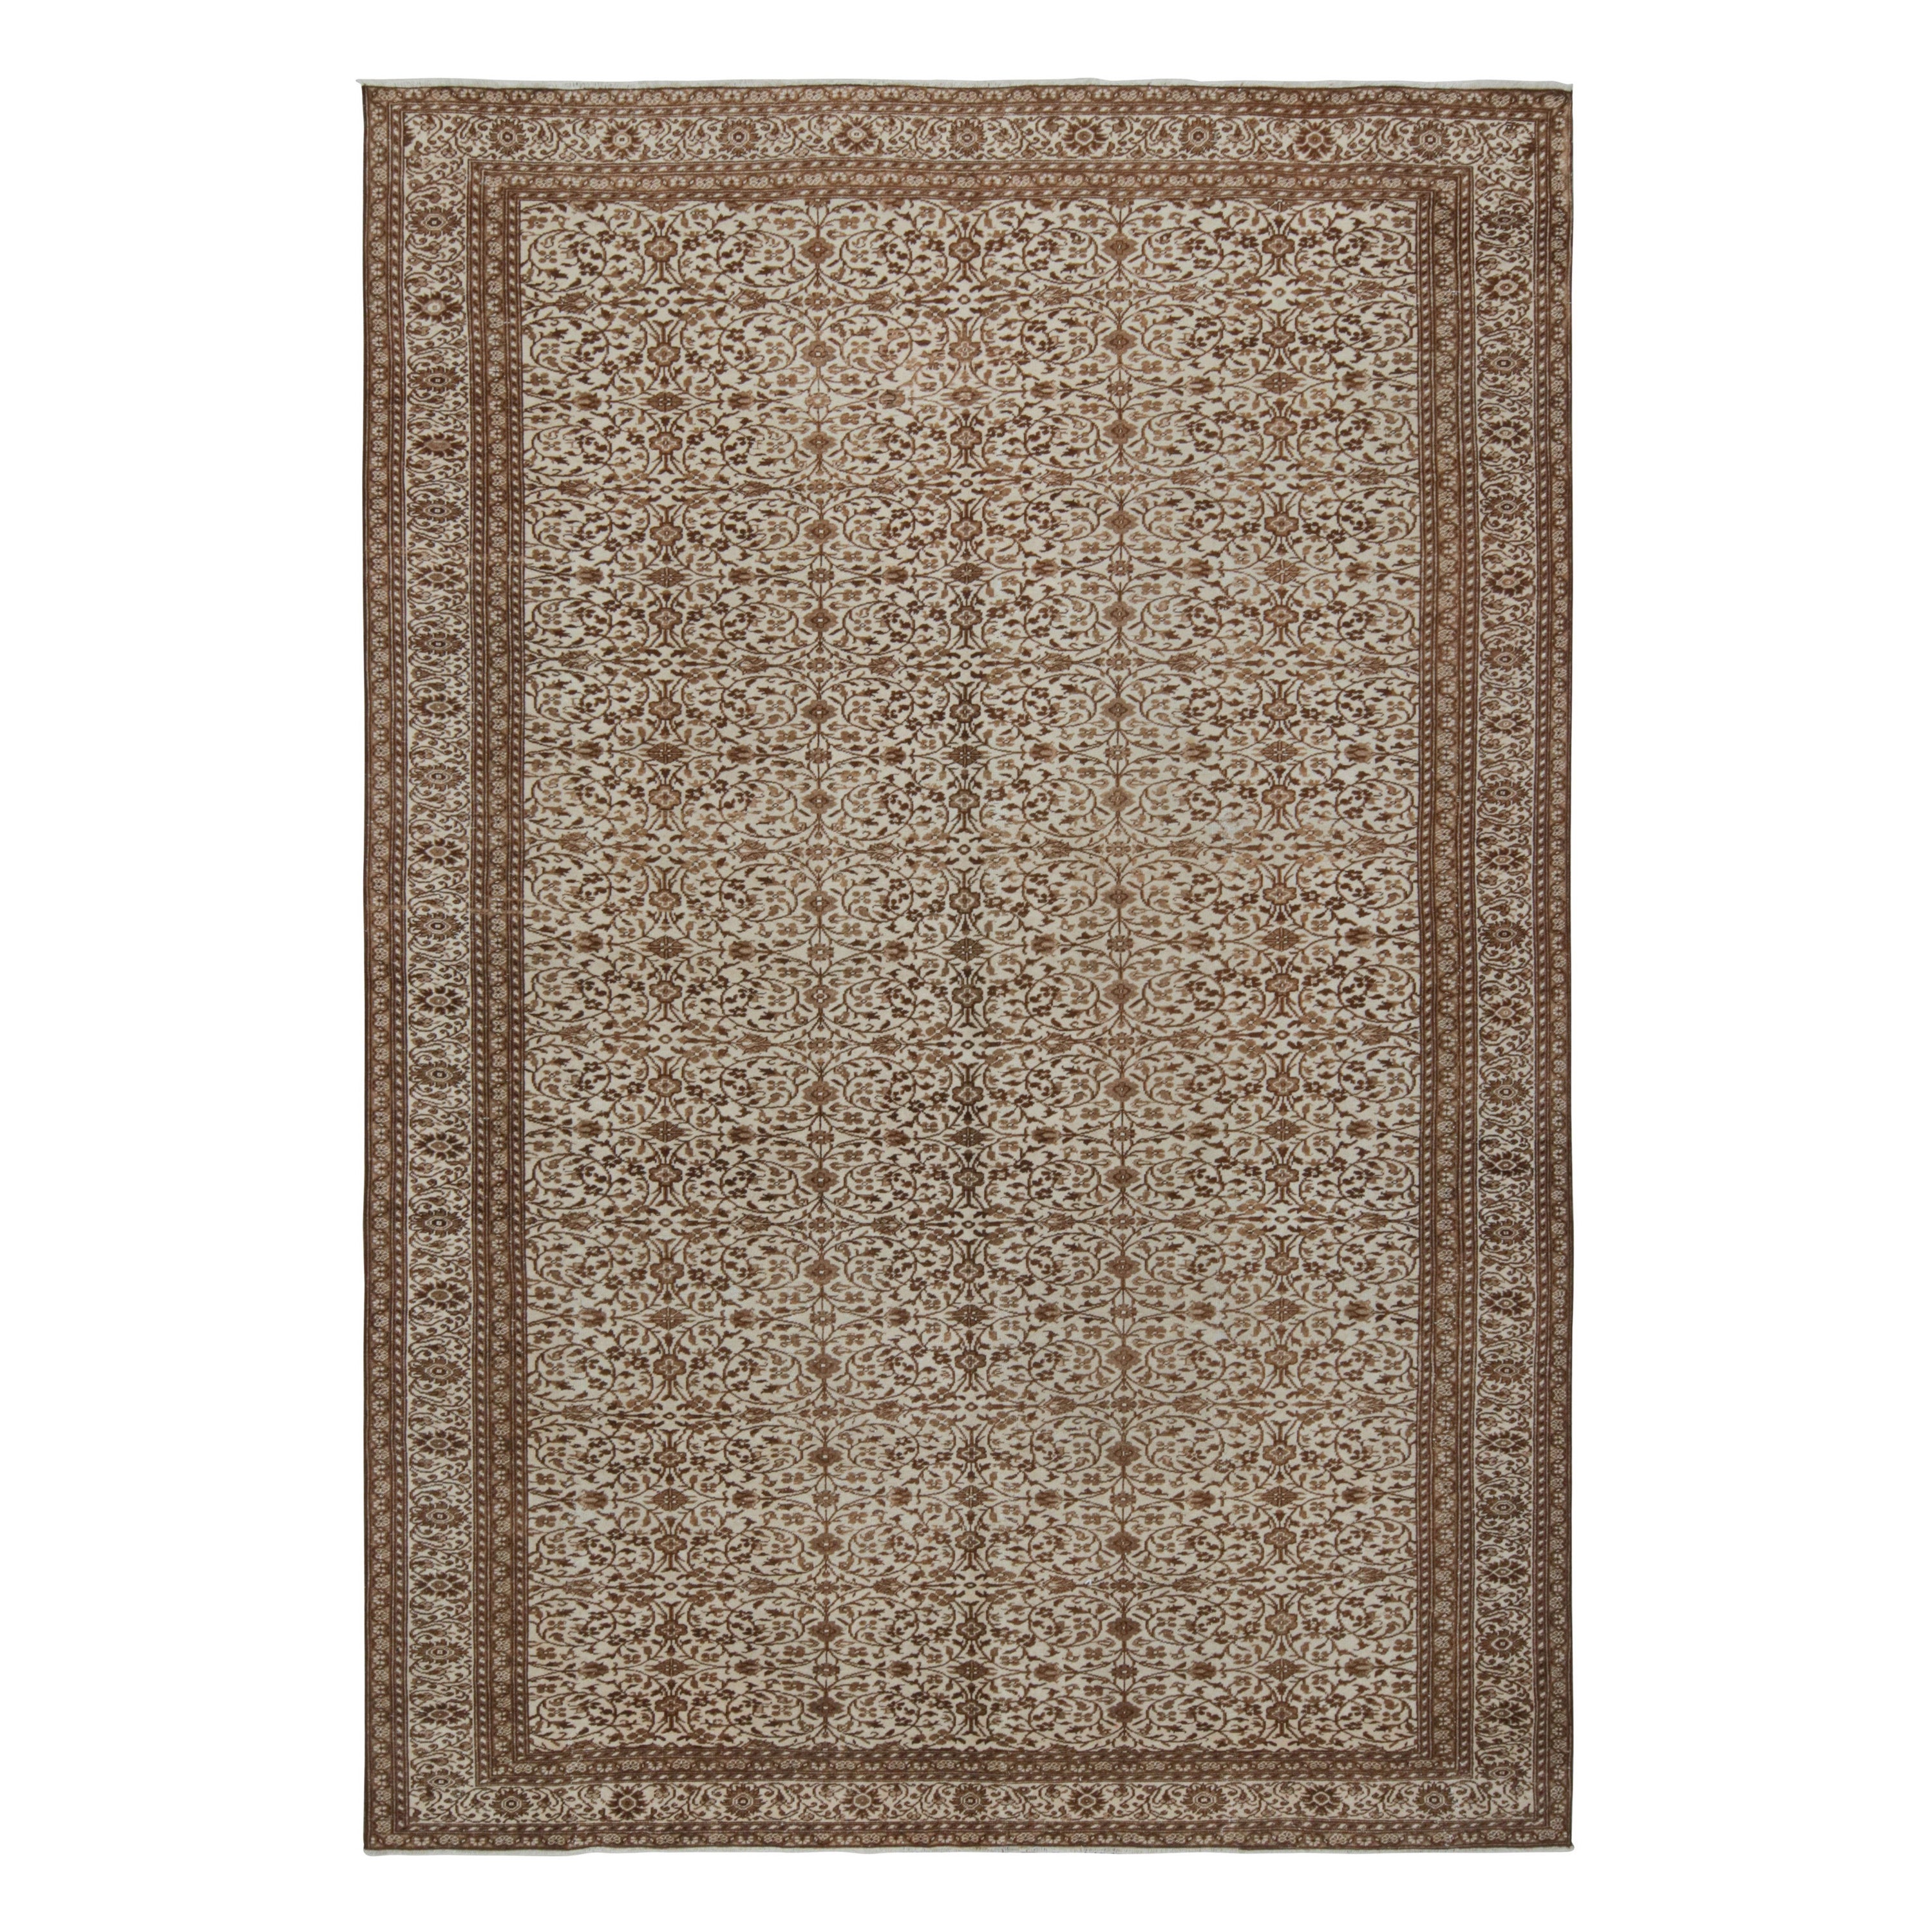 Vintage Sivas rug in Beige and Brown, with Herati Patterns, from Rug and Kilim For Sale